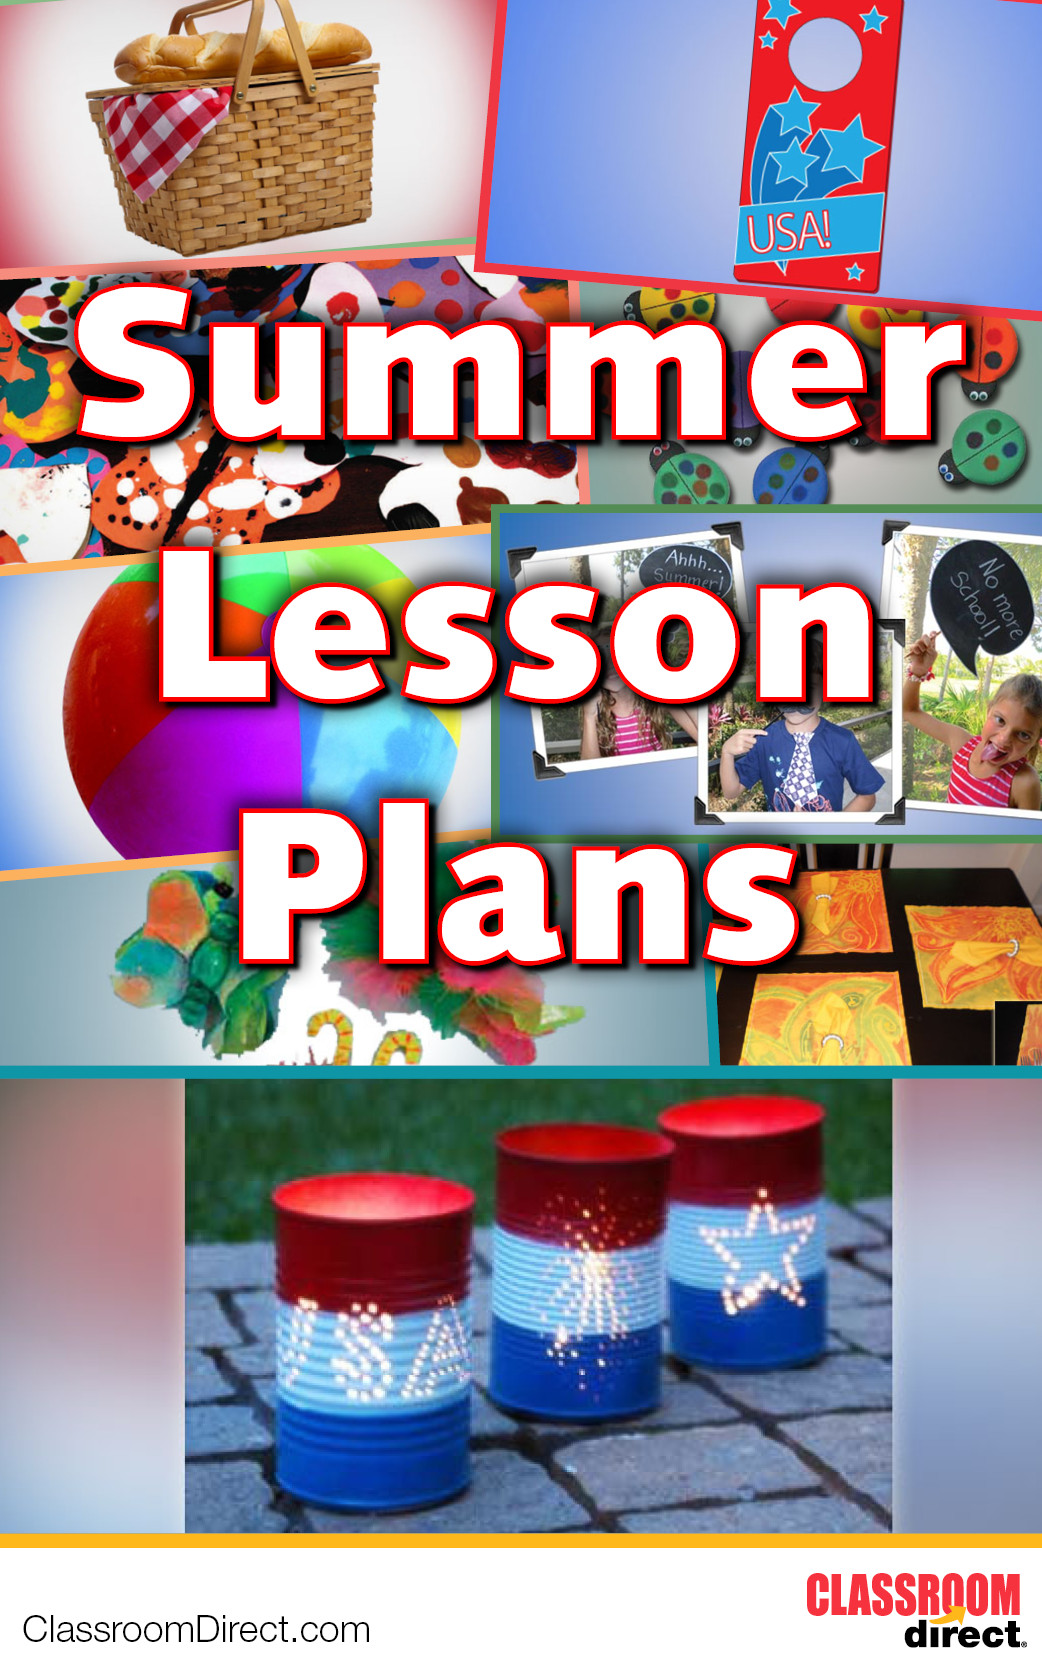 Summer Lesson Plans for toddlers Perfect Lesson Plans for Summer